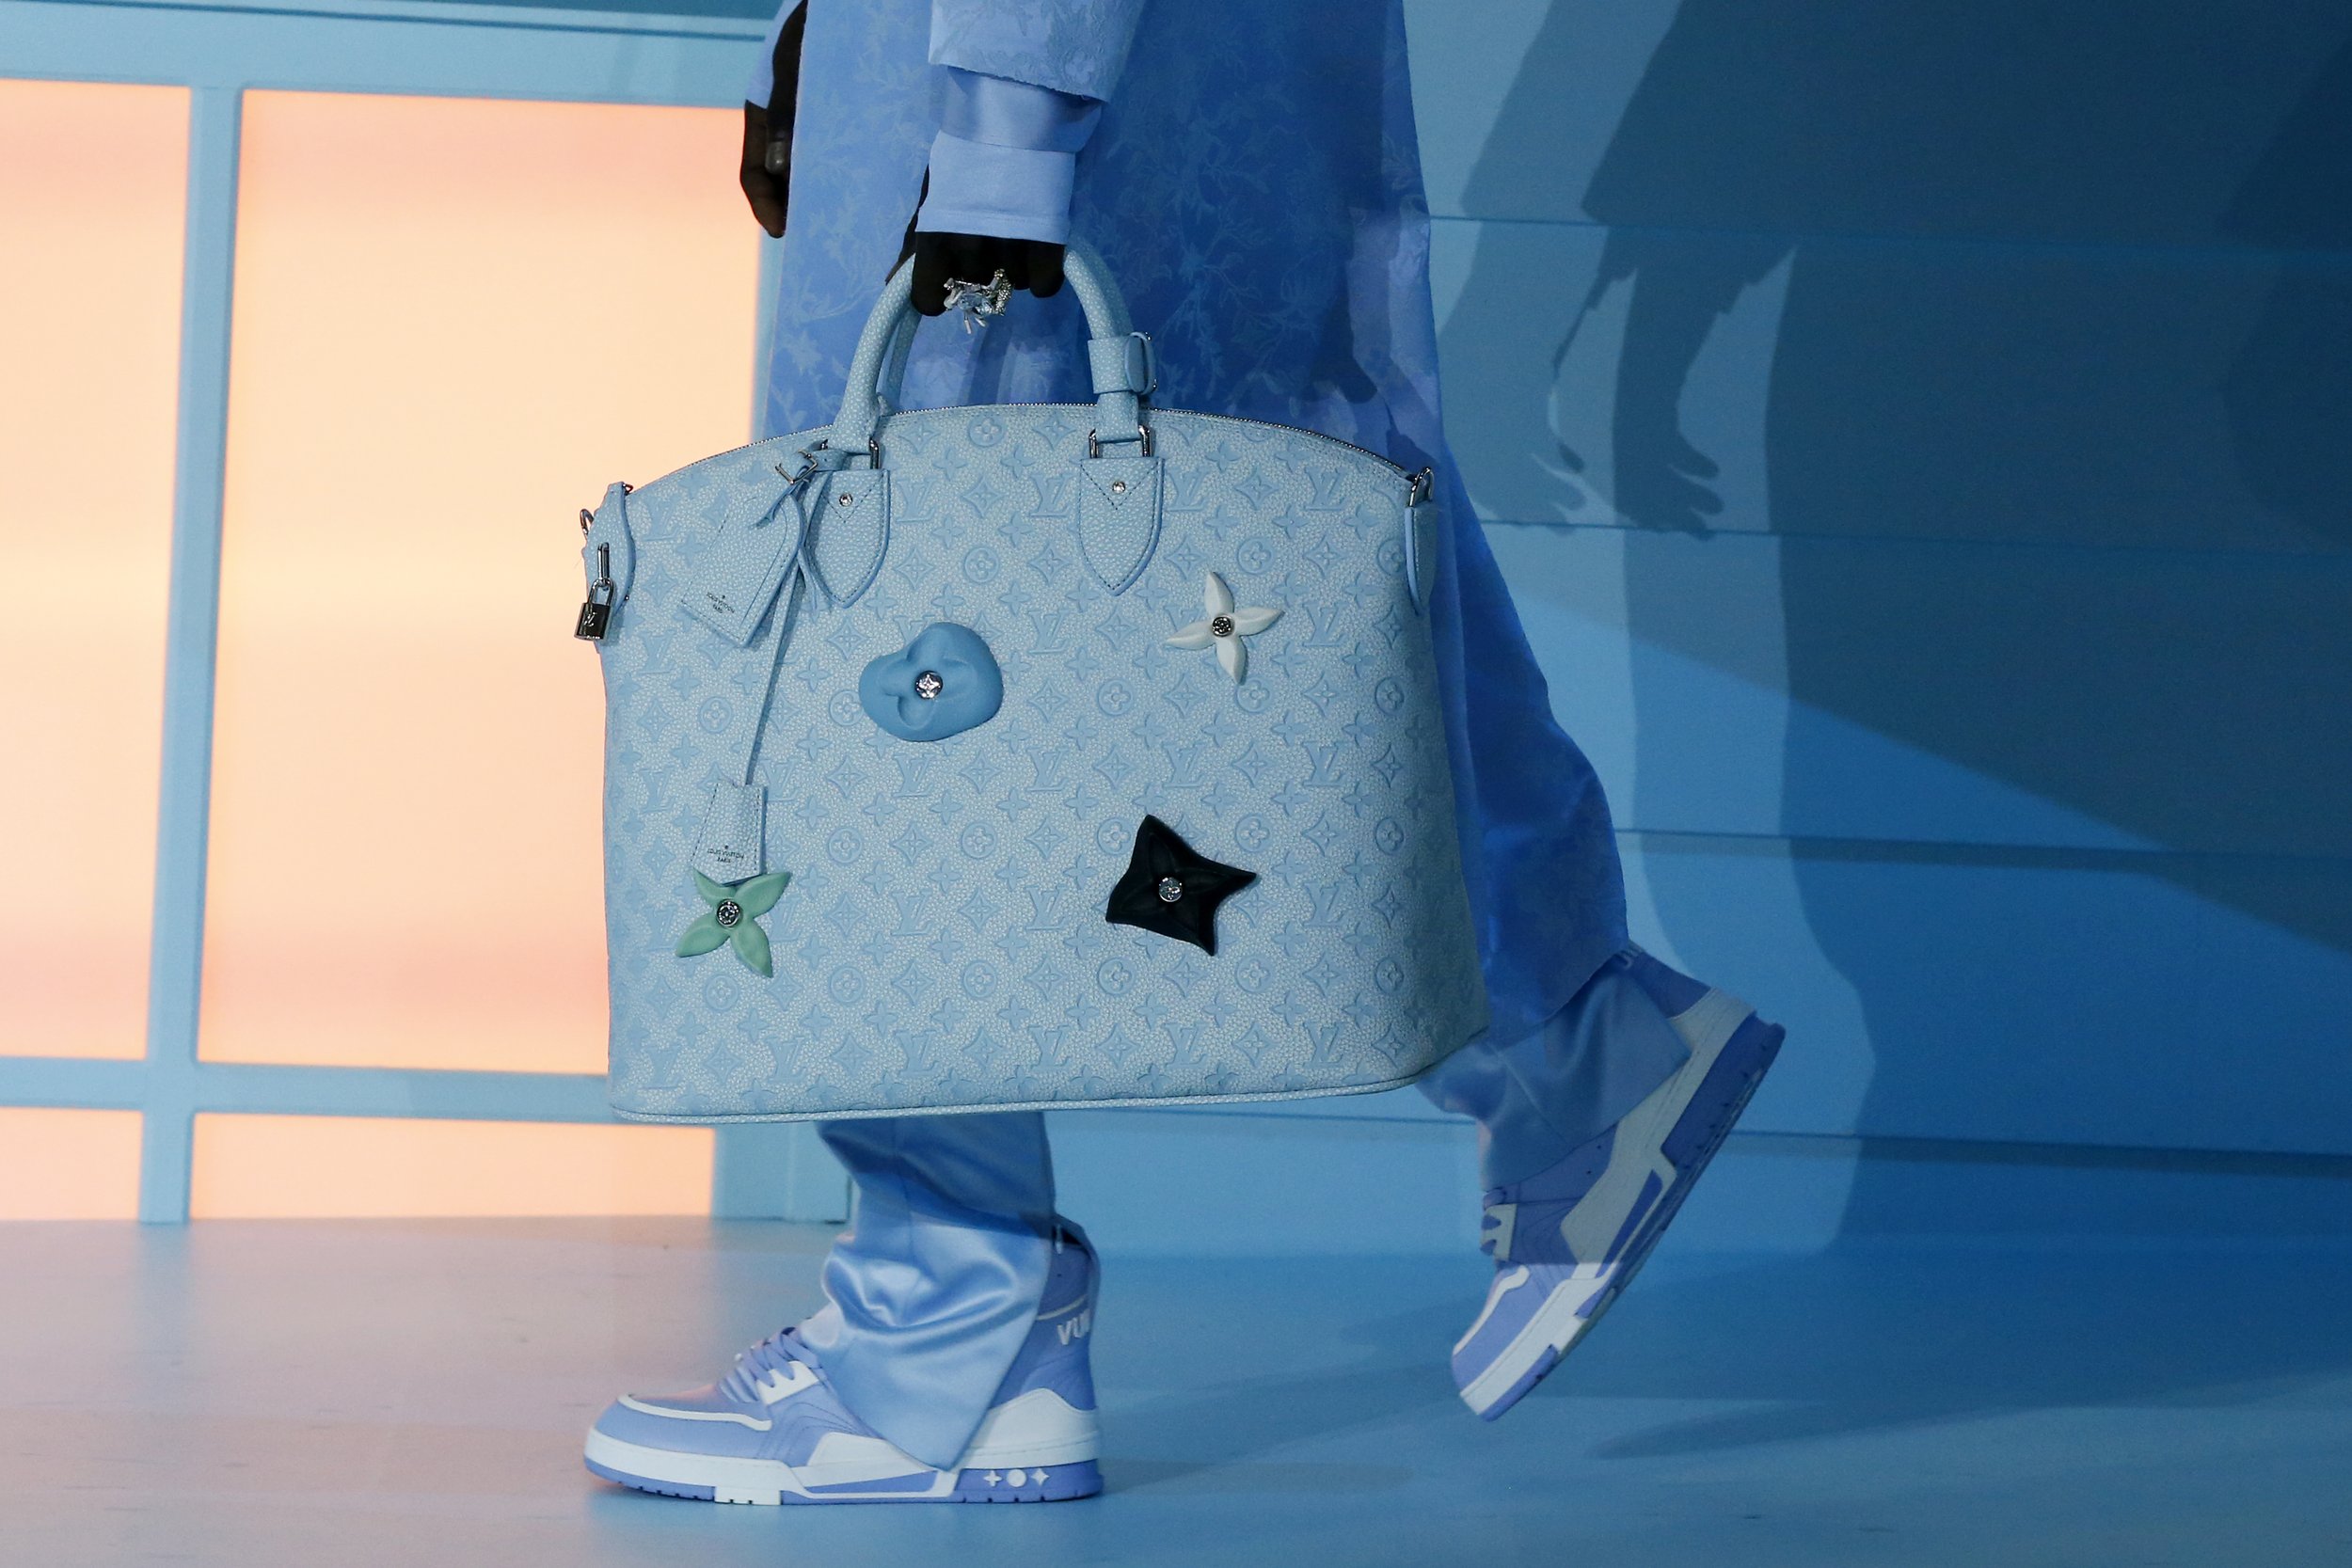 VIRGIL ABLOH'S 8TH AND FINAL COLLECTION FOR LOUIS VUITTON